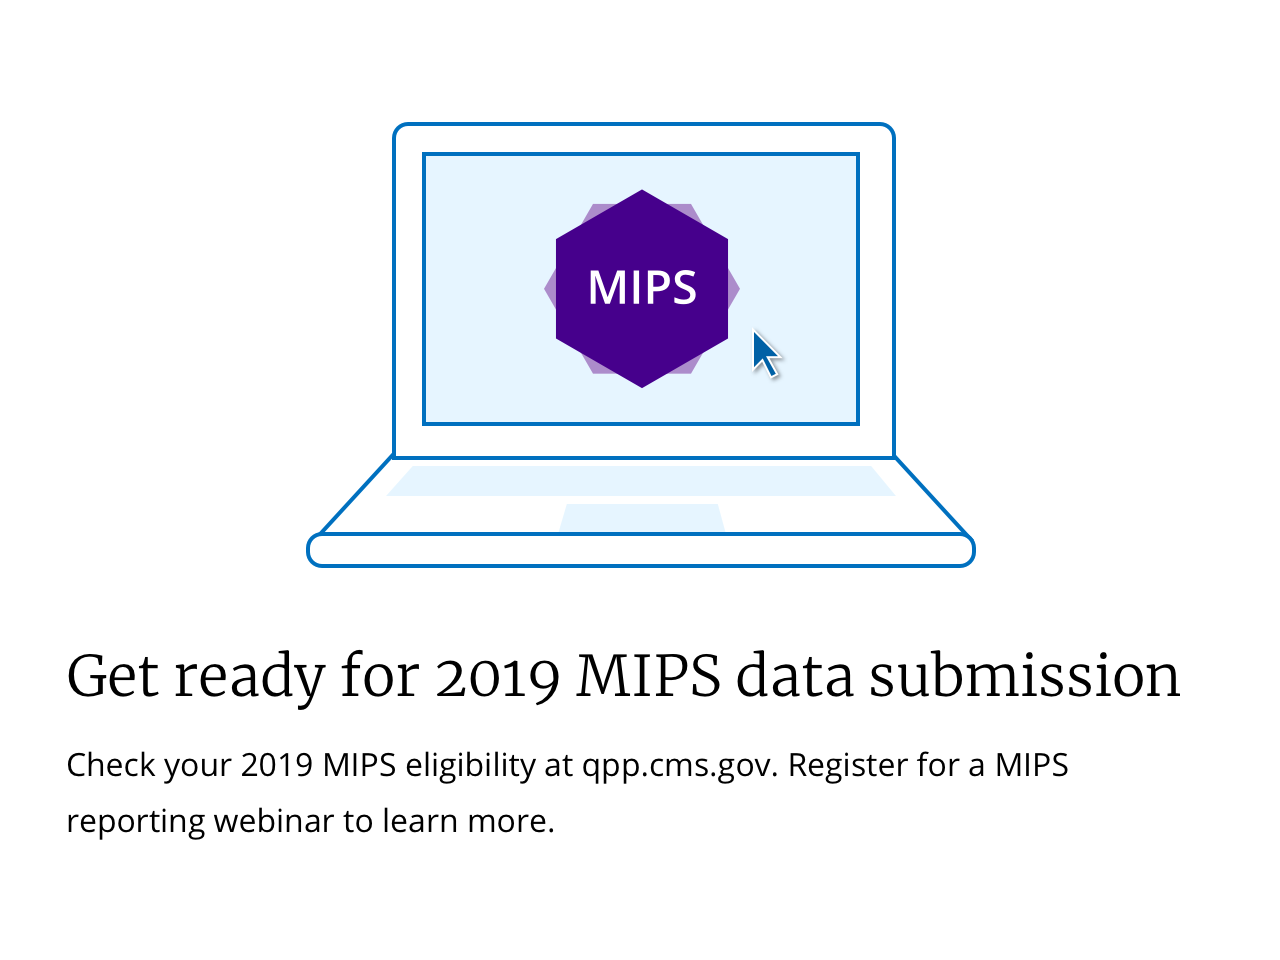 Check your 2019 MIPS eligibility